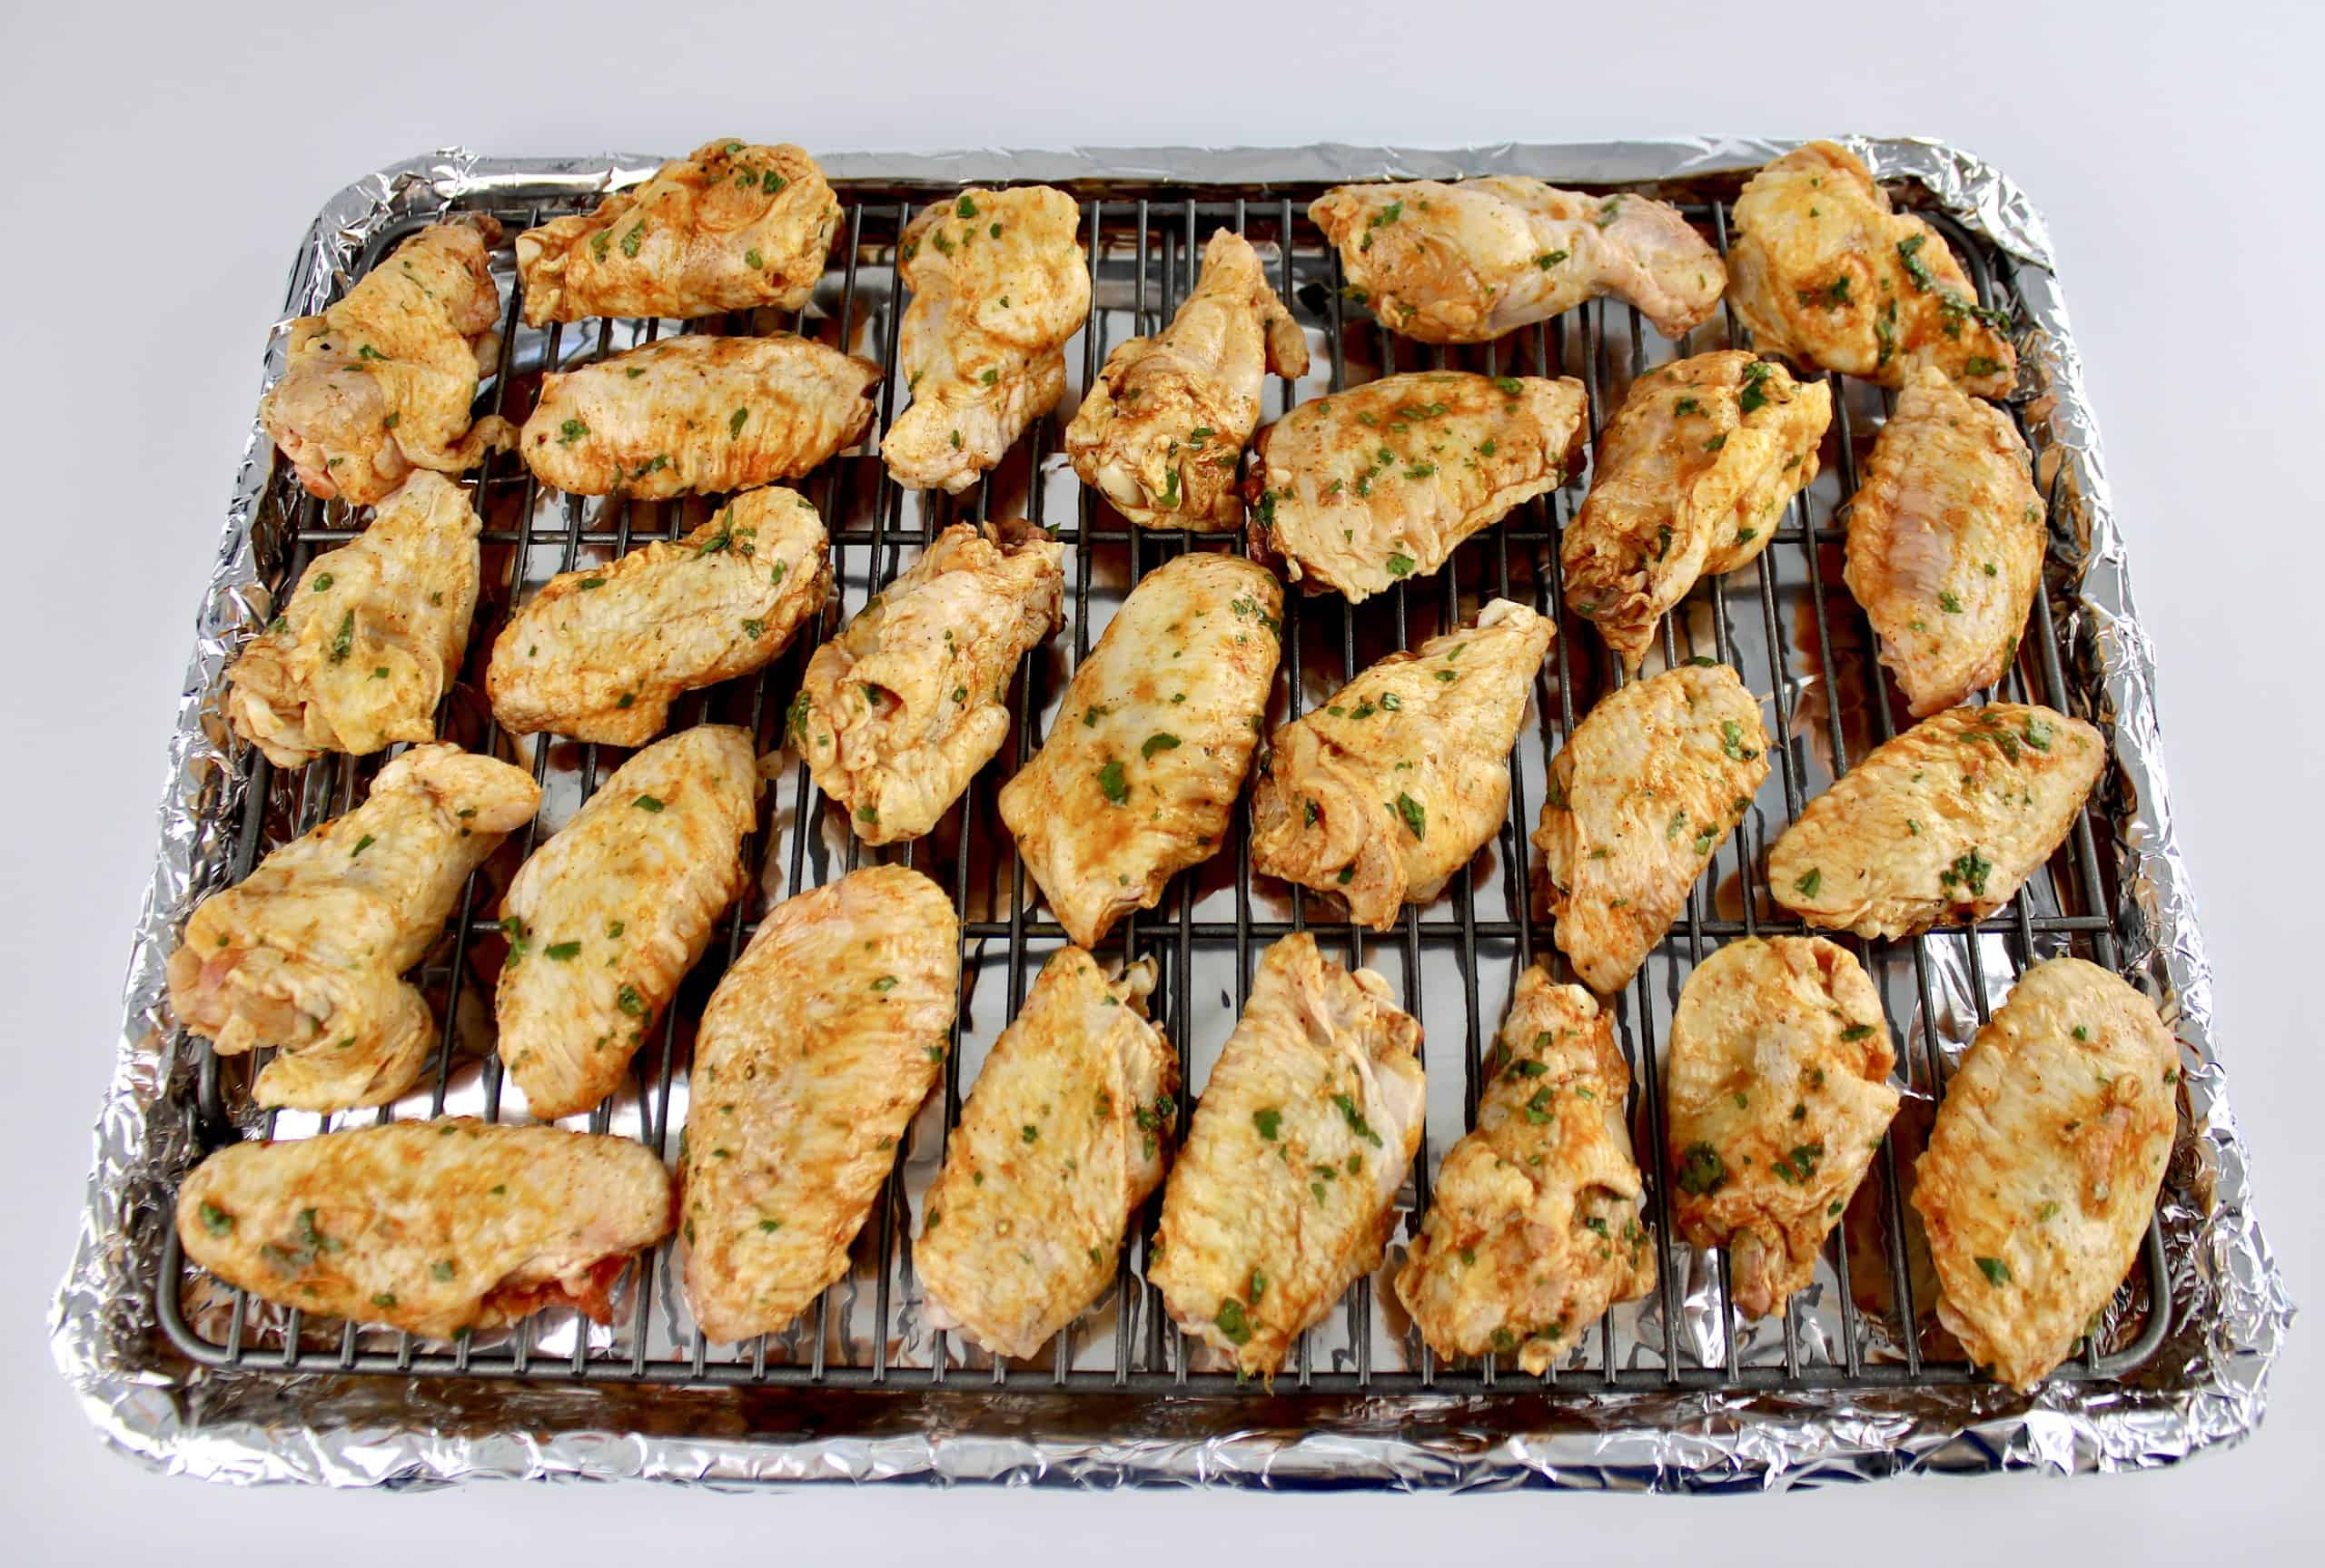 Cilantro Lime Chicken Wings unbaked on baking rack